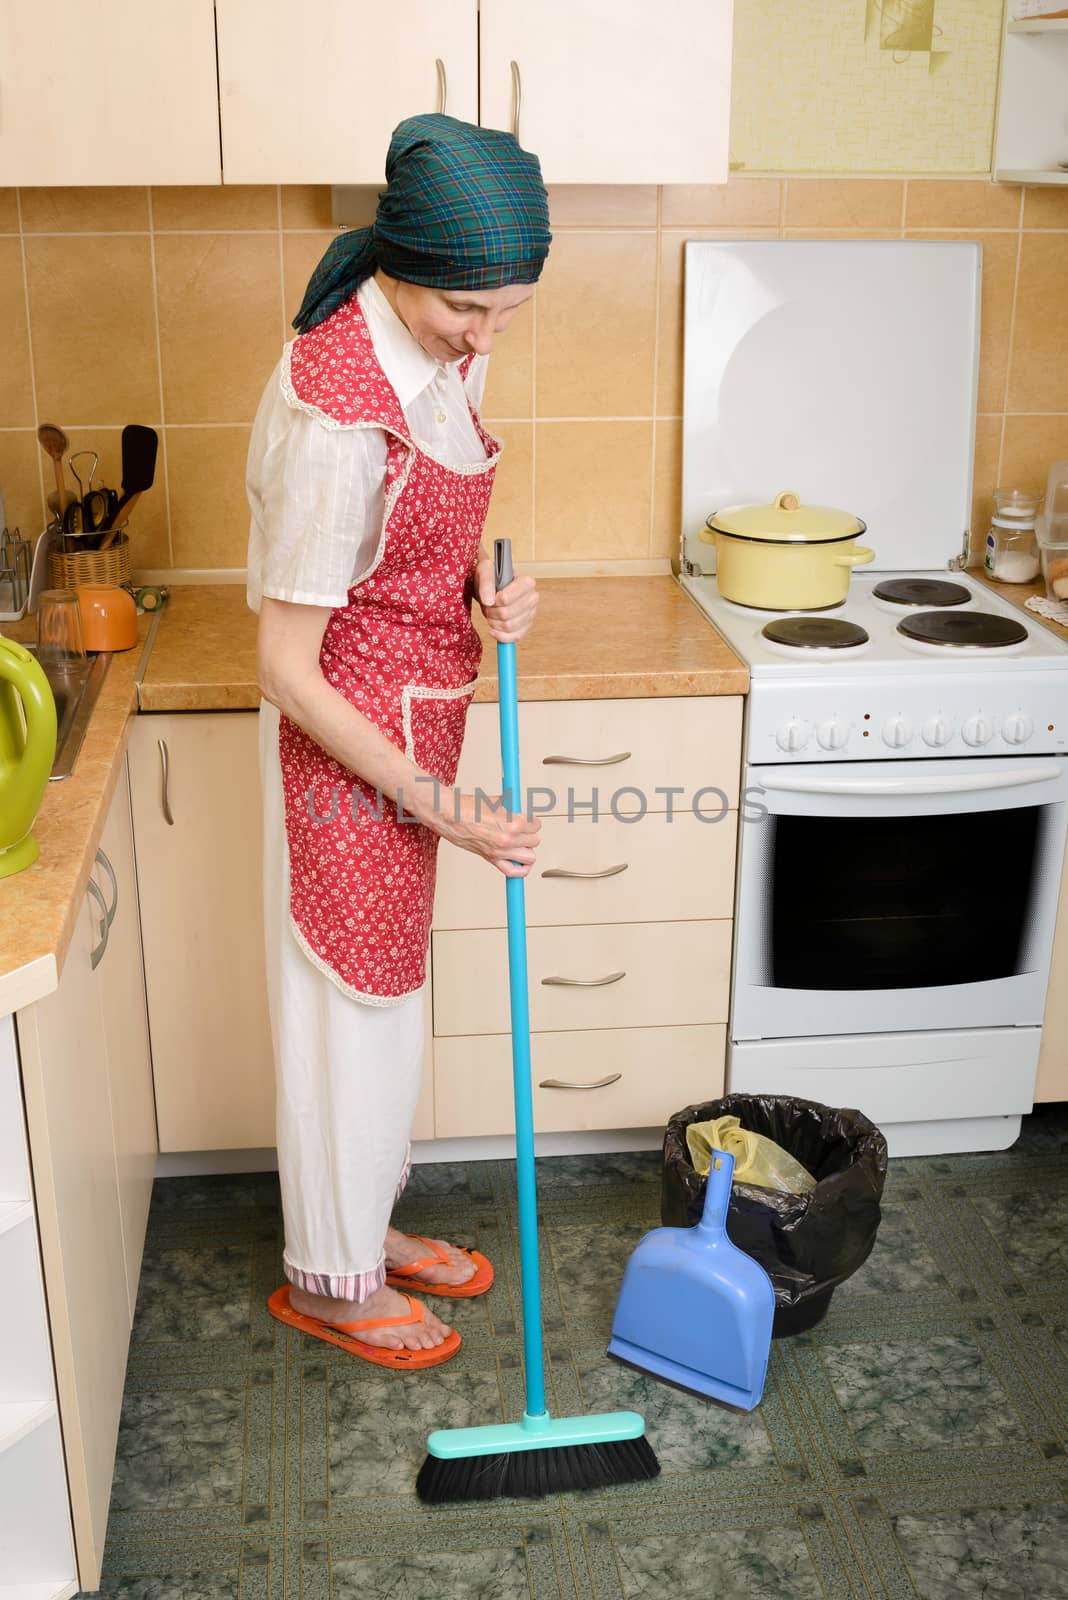 An  adult woman, a housewife or a maid, wearing a red apron and a green scarf on her head is sweeping the kitchen with a broom